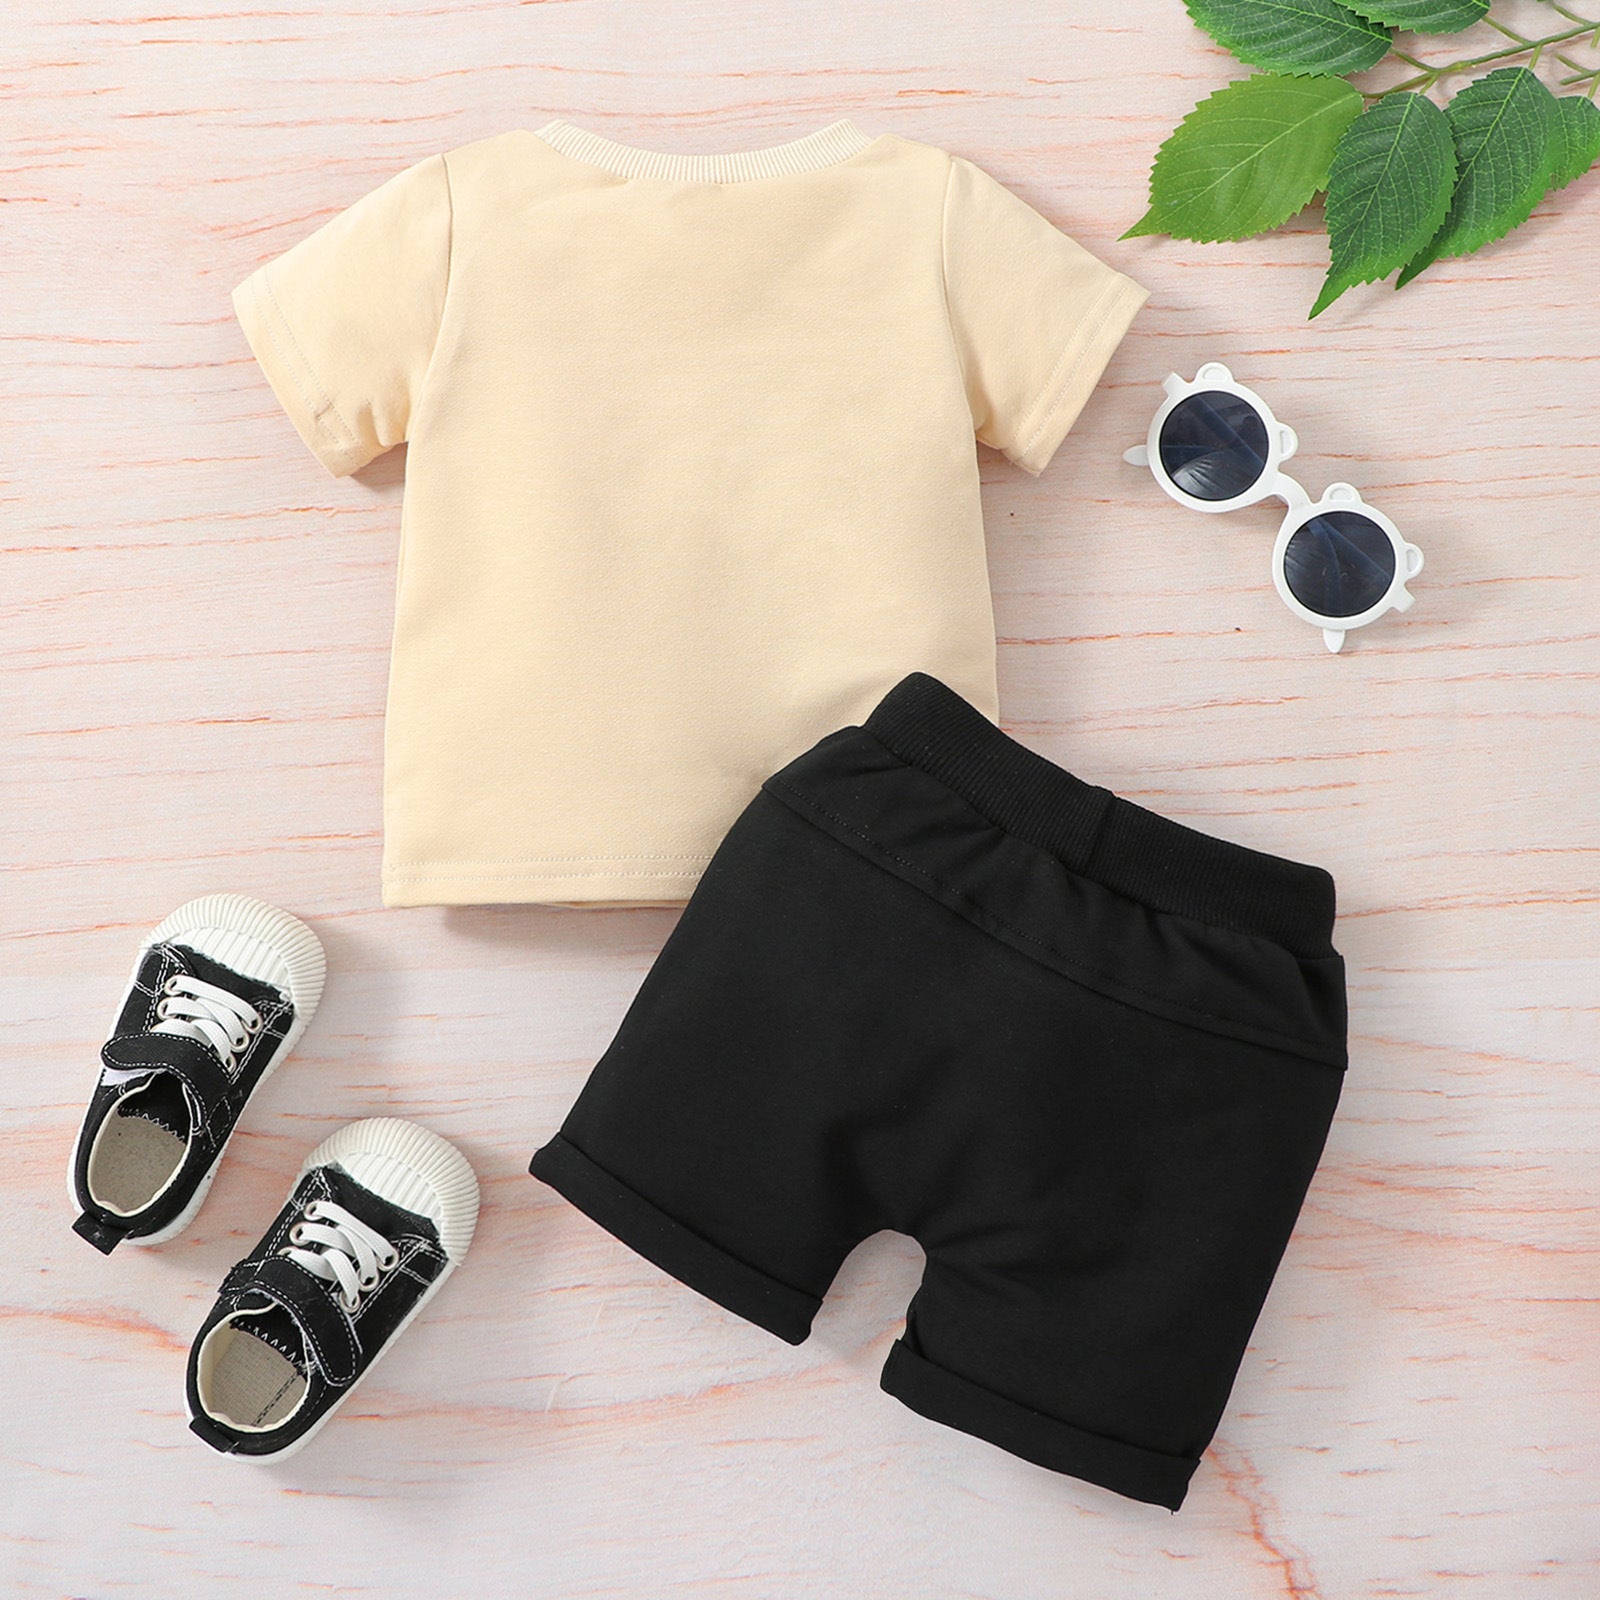  Baby Clothes Shirt Printed Letters Solid Color Shorts